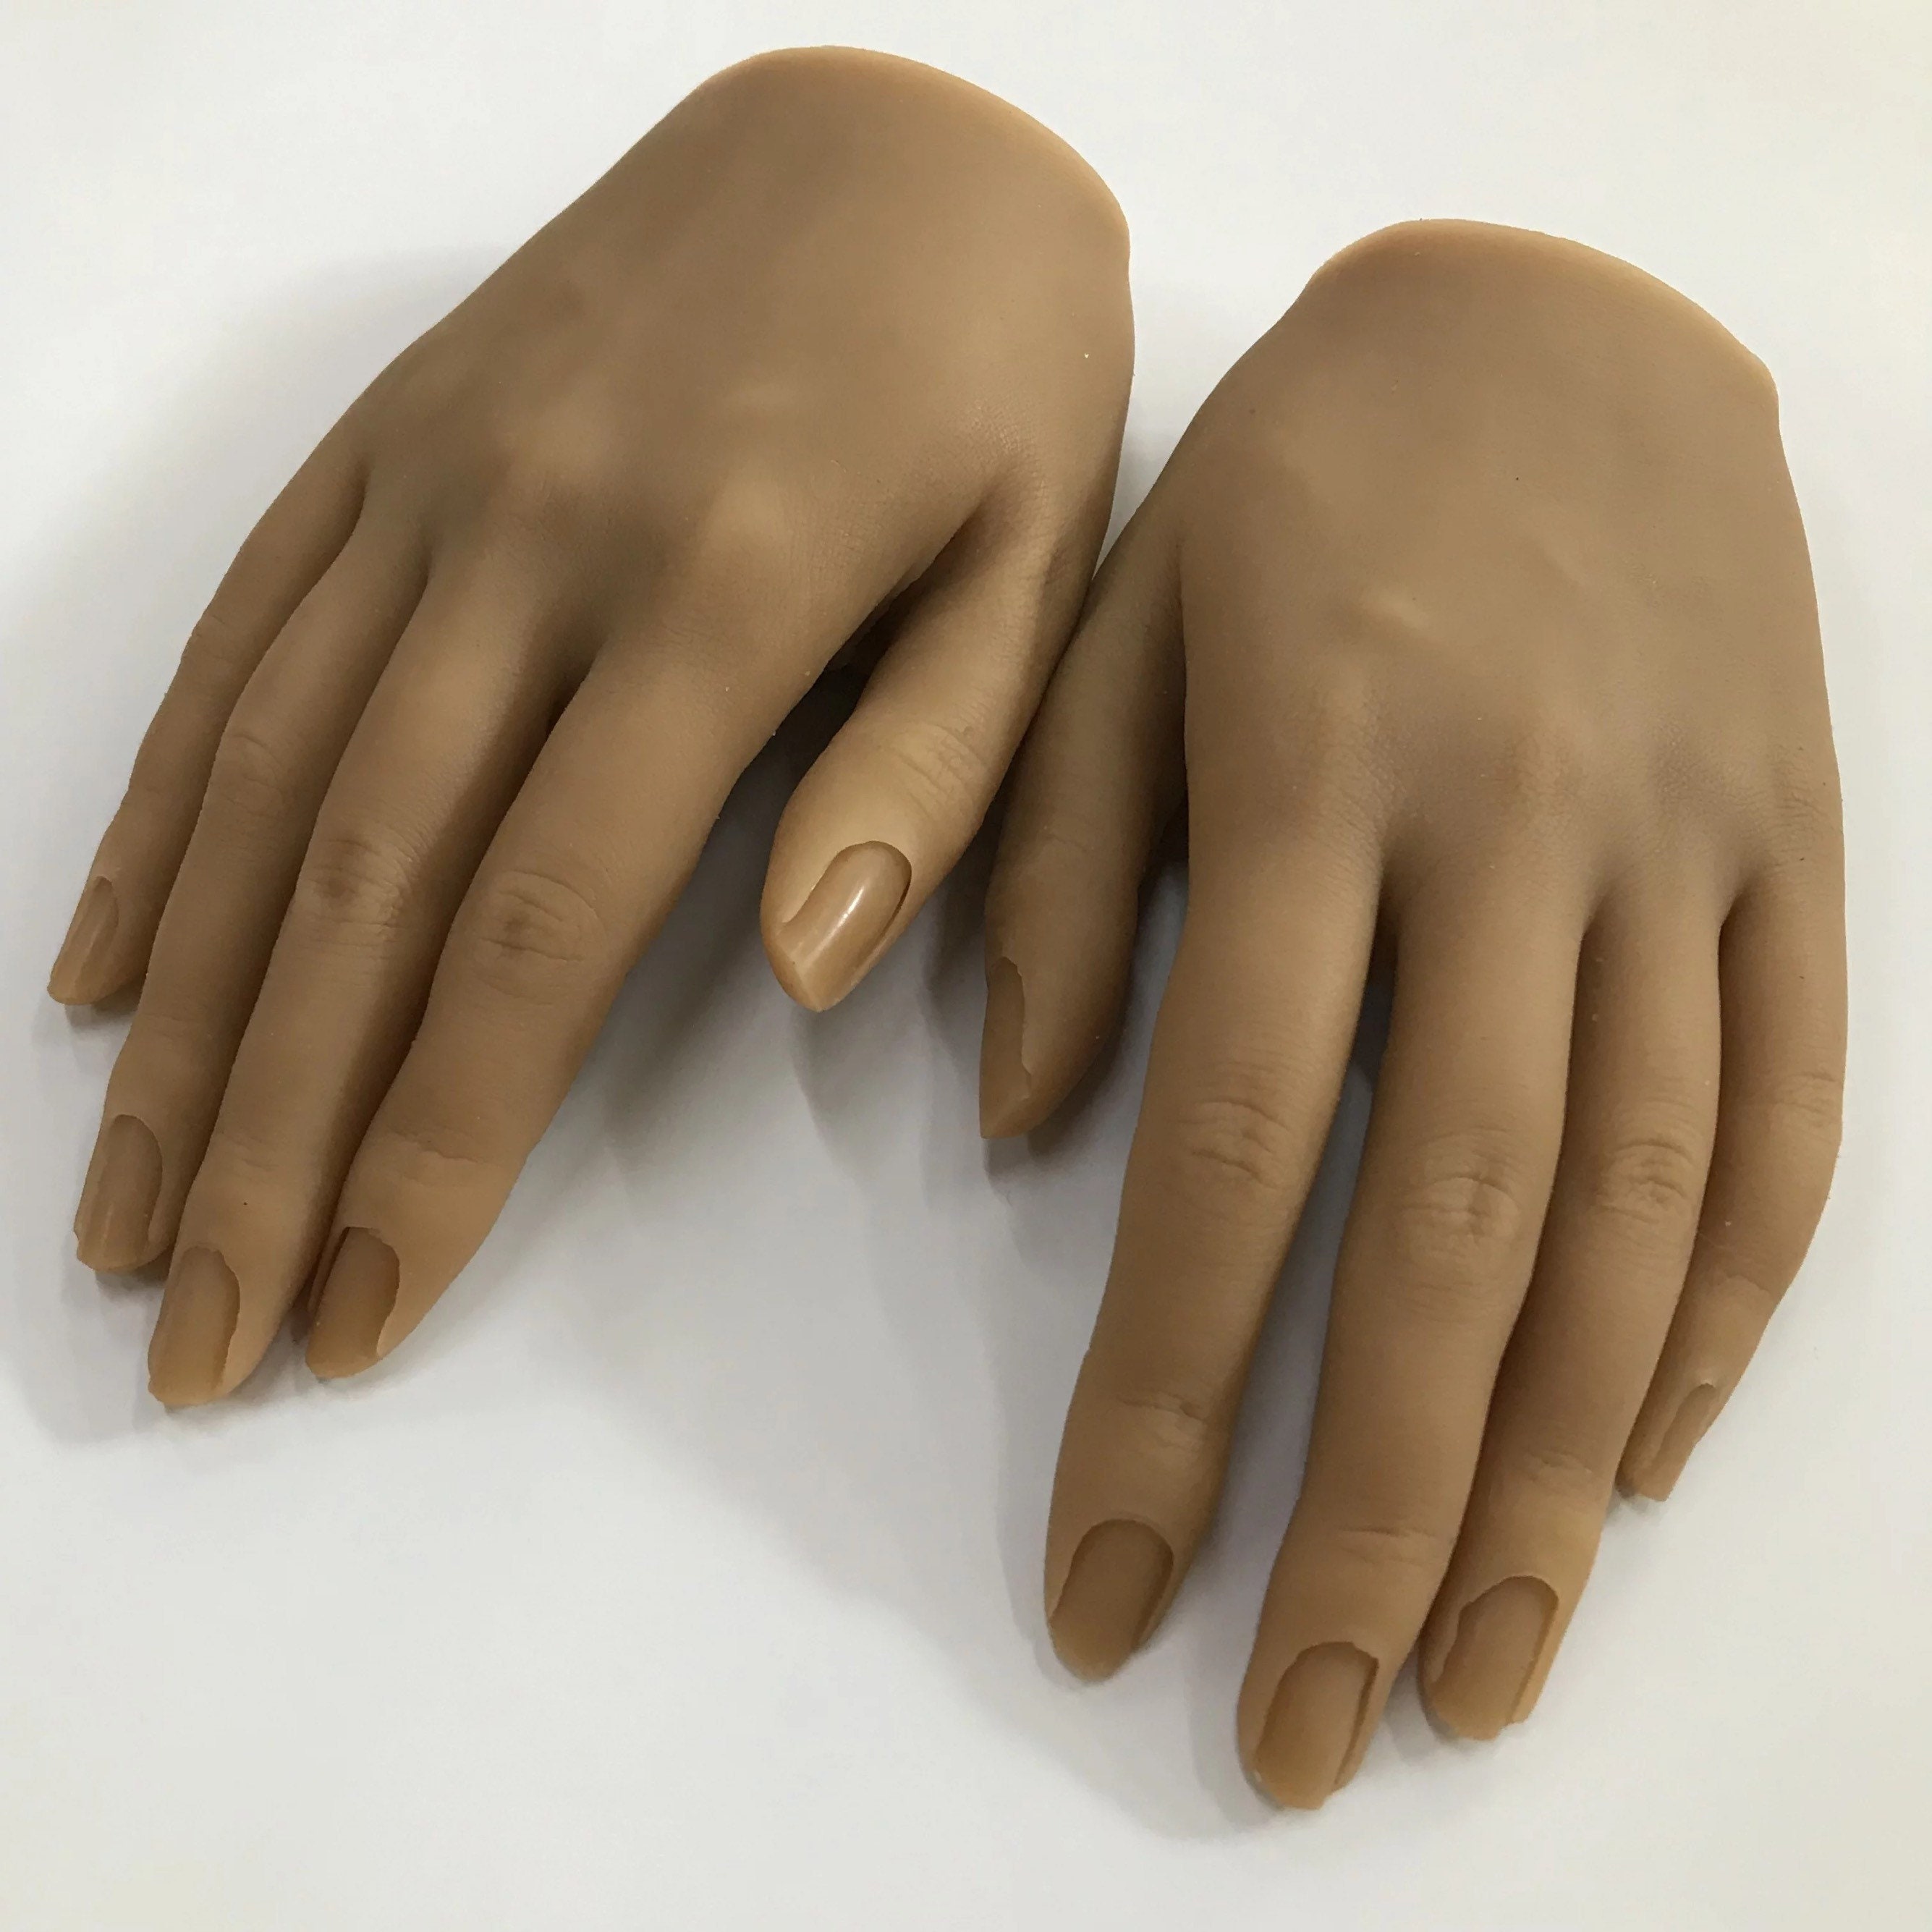 Hand Practice Nail Nails Mannequin Manicure Hands Fake False Tech Art Left  Display Trainer Model Rubber Training Stand - Walmart.com